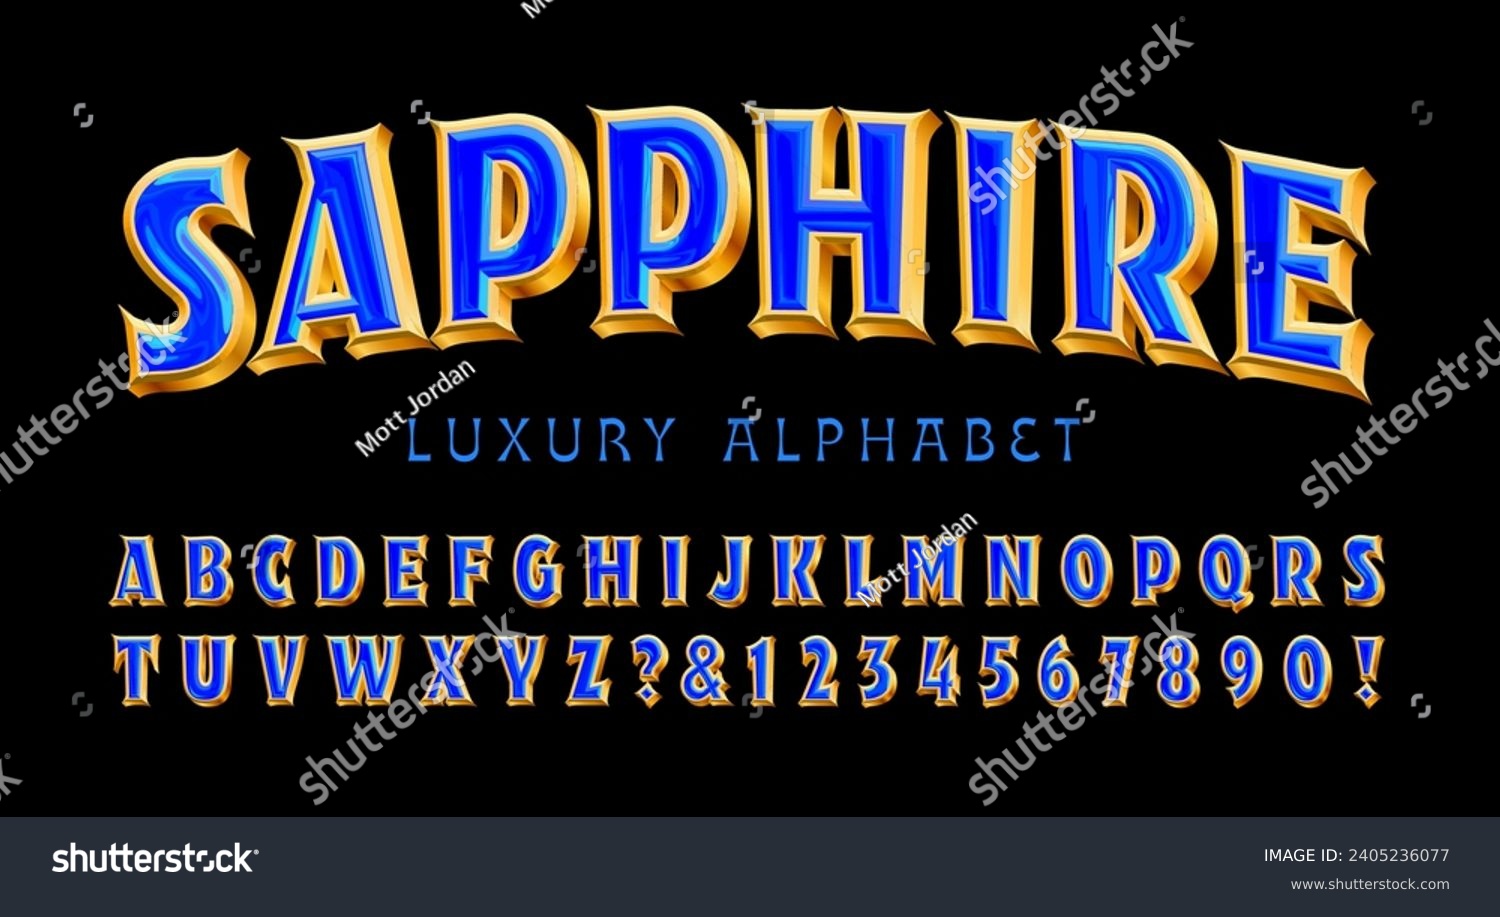 SVG of Sapphire is a posh and luxurious 3d effect alphabet with gold setting and shiny blue gemstone in the interior. svg